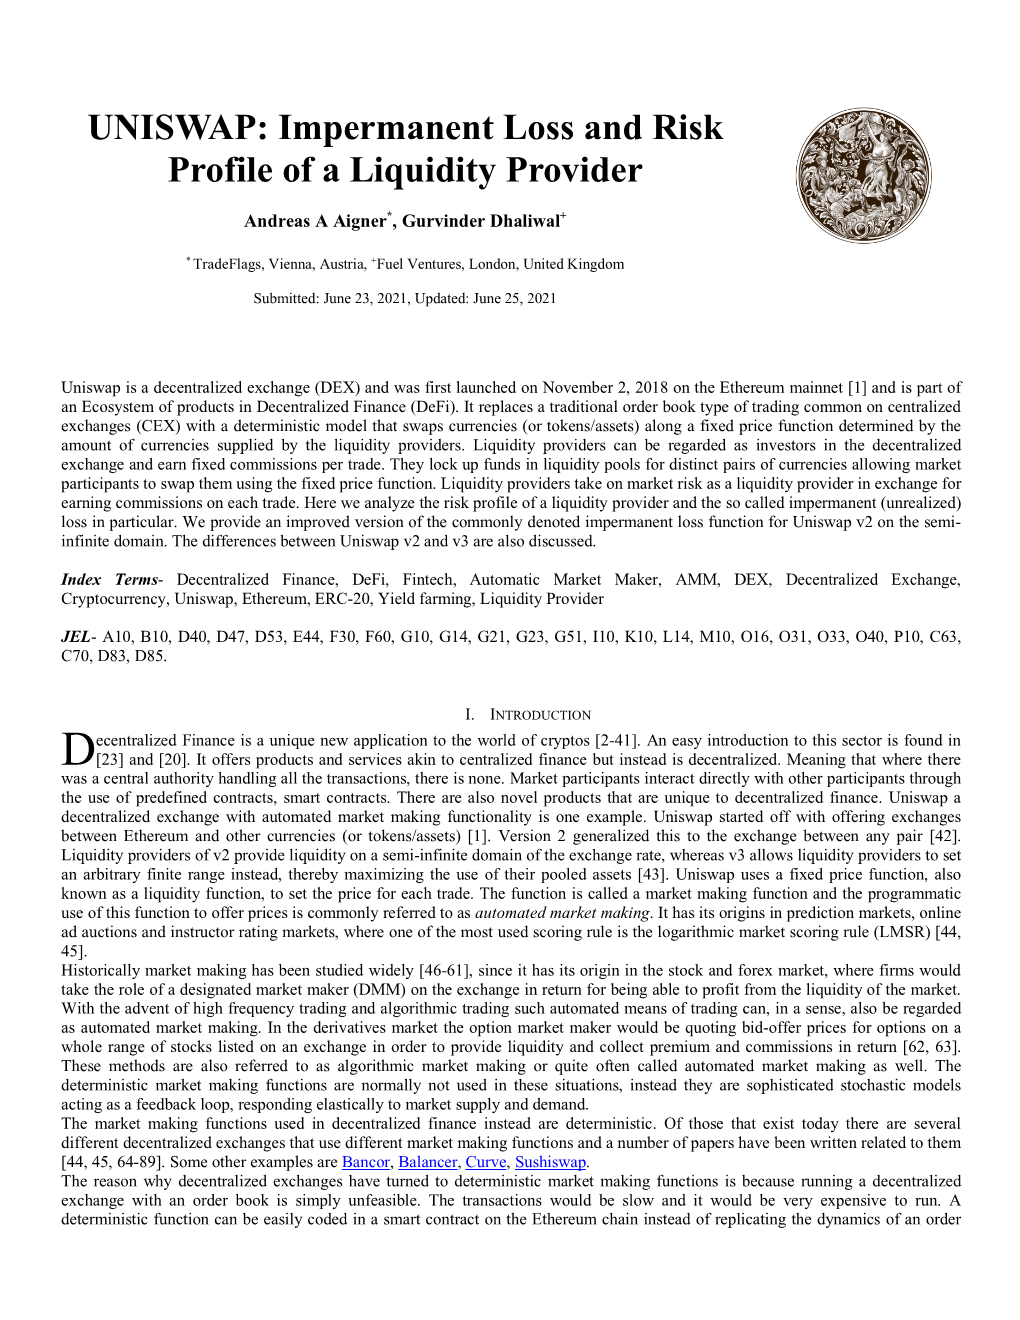 UNISWAP: Impermanent Loss and Risk Profile of a Liquidity Provider